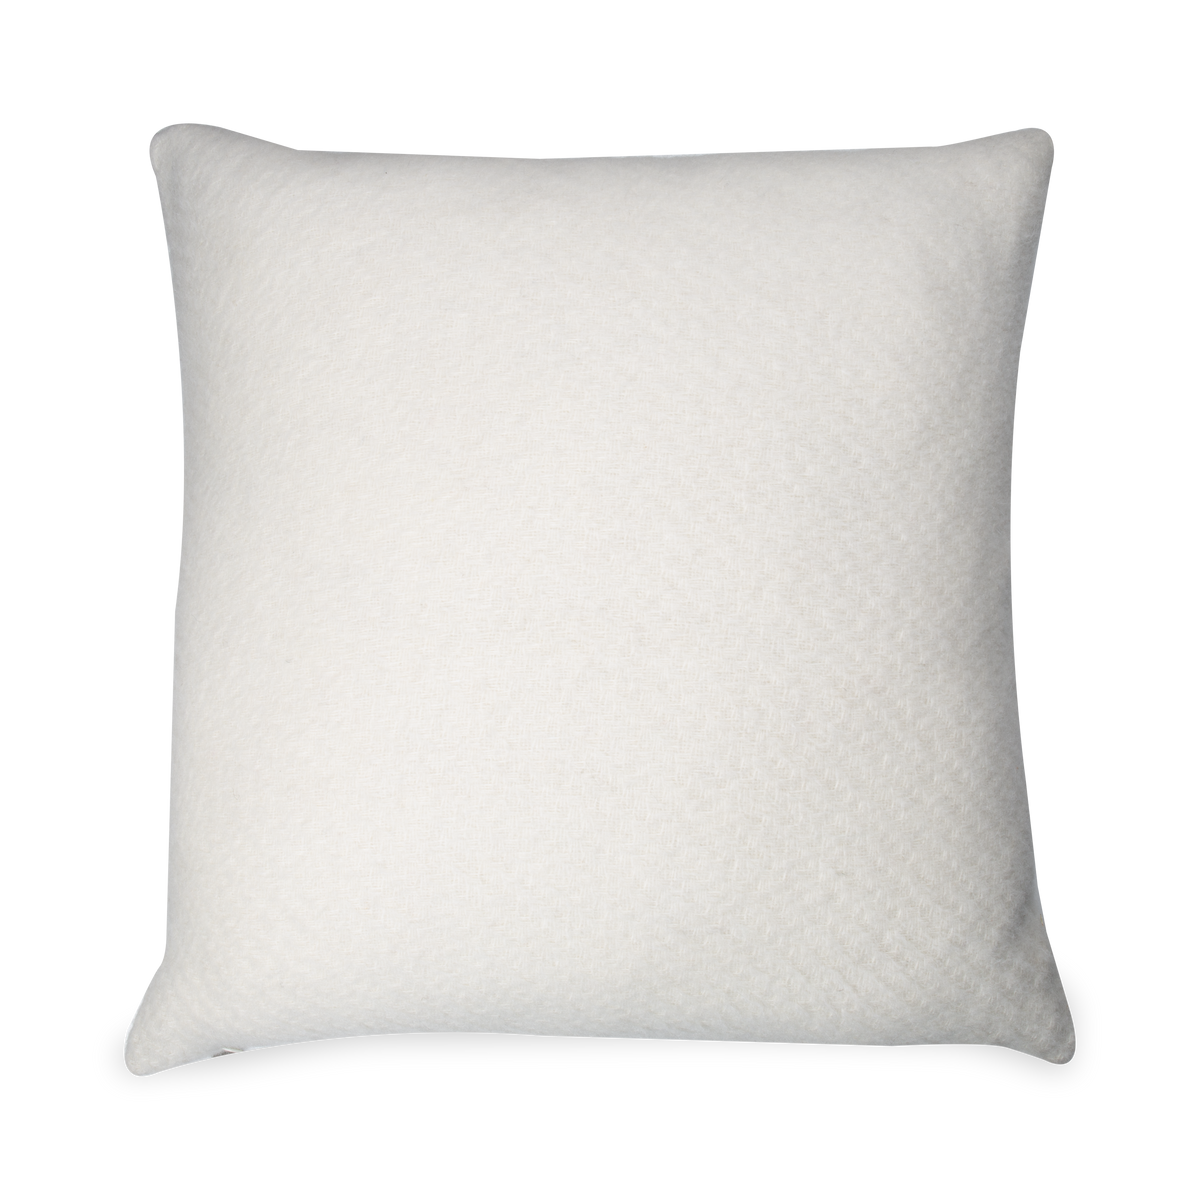 The Alpaca Lambswool Pillow is a classic design made from alpaca and lambswool fibres featuring a delicate texture in an Ivory colour.